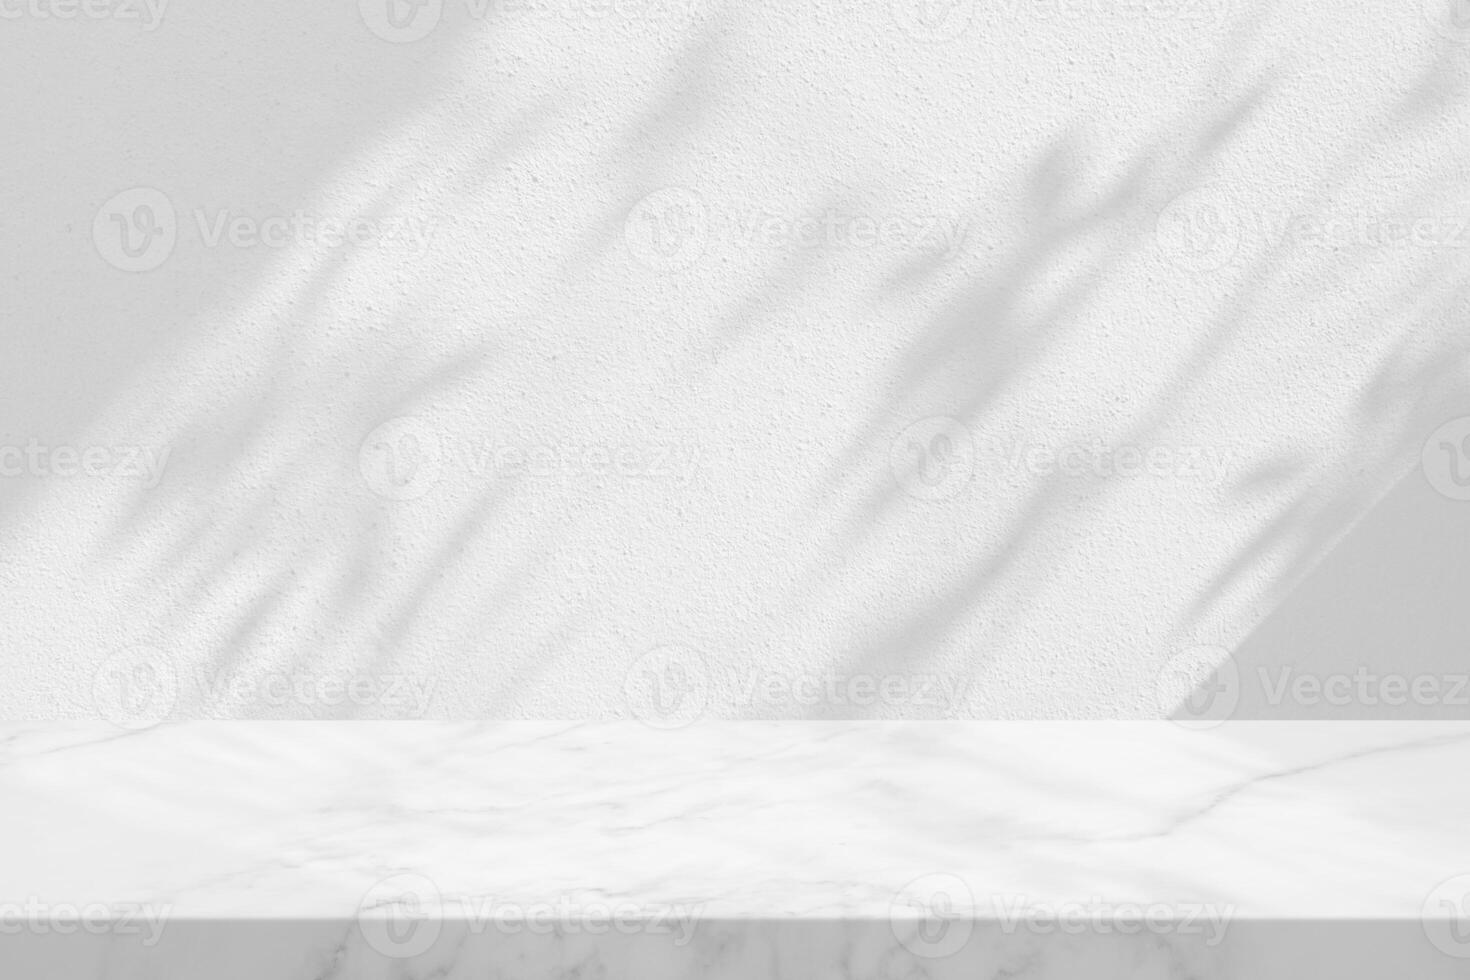 White Marble Table with Tree Shadow on Concrete Wall Texture Background photo